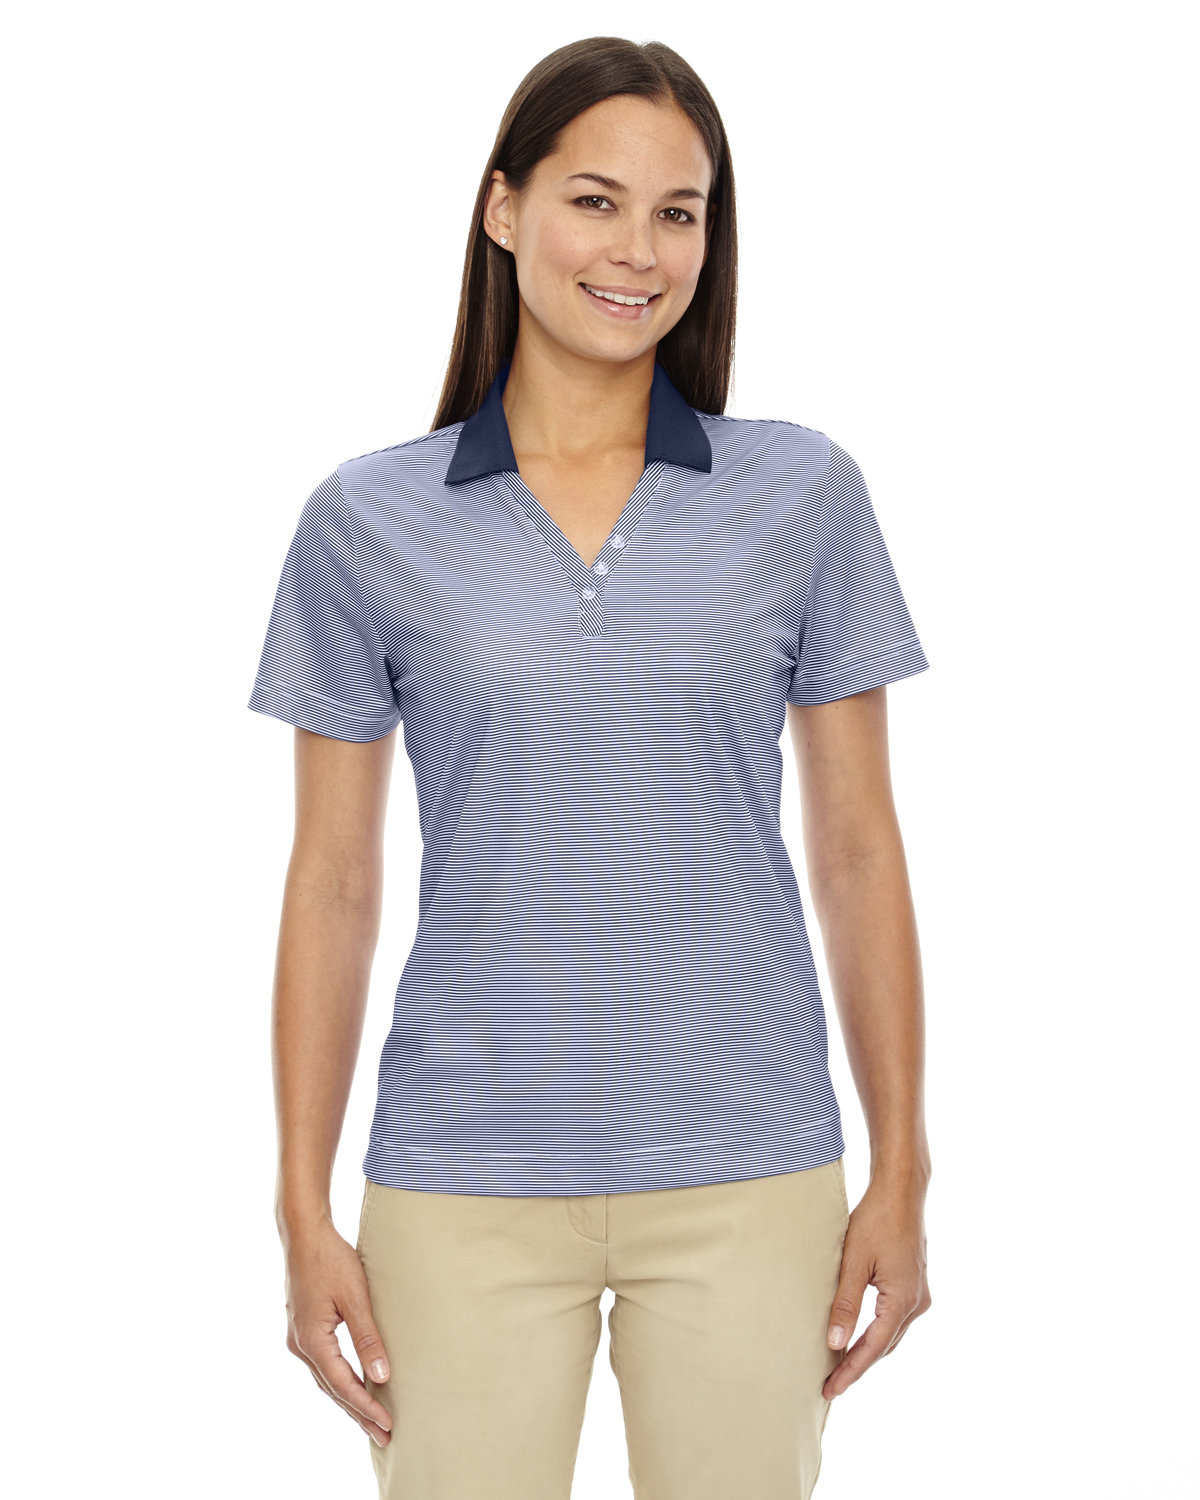 Extreme Ladies' Eperformance™ Launch Snag Protection Striped Polo CLASSIC NAVY 